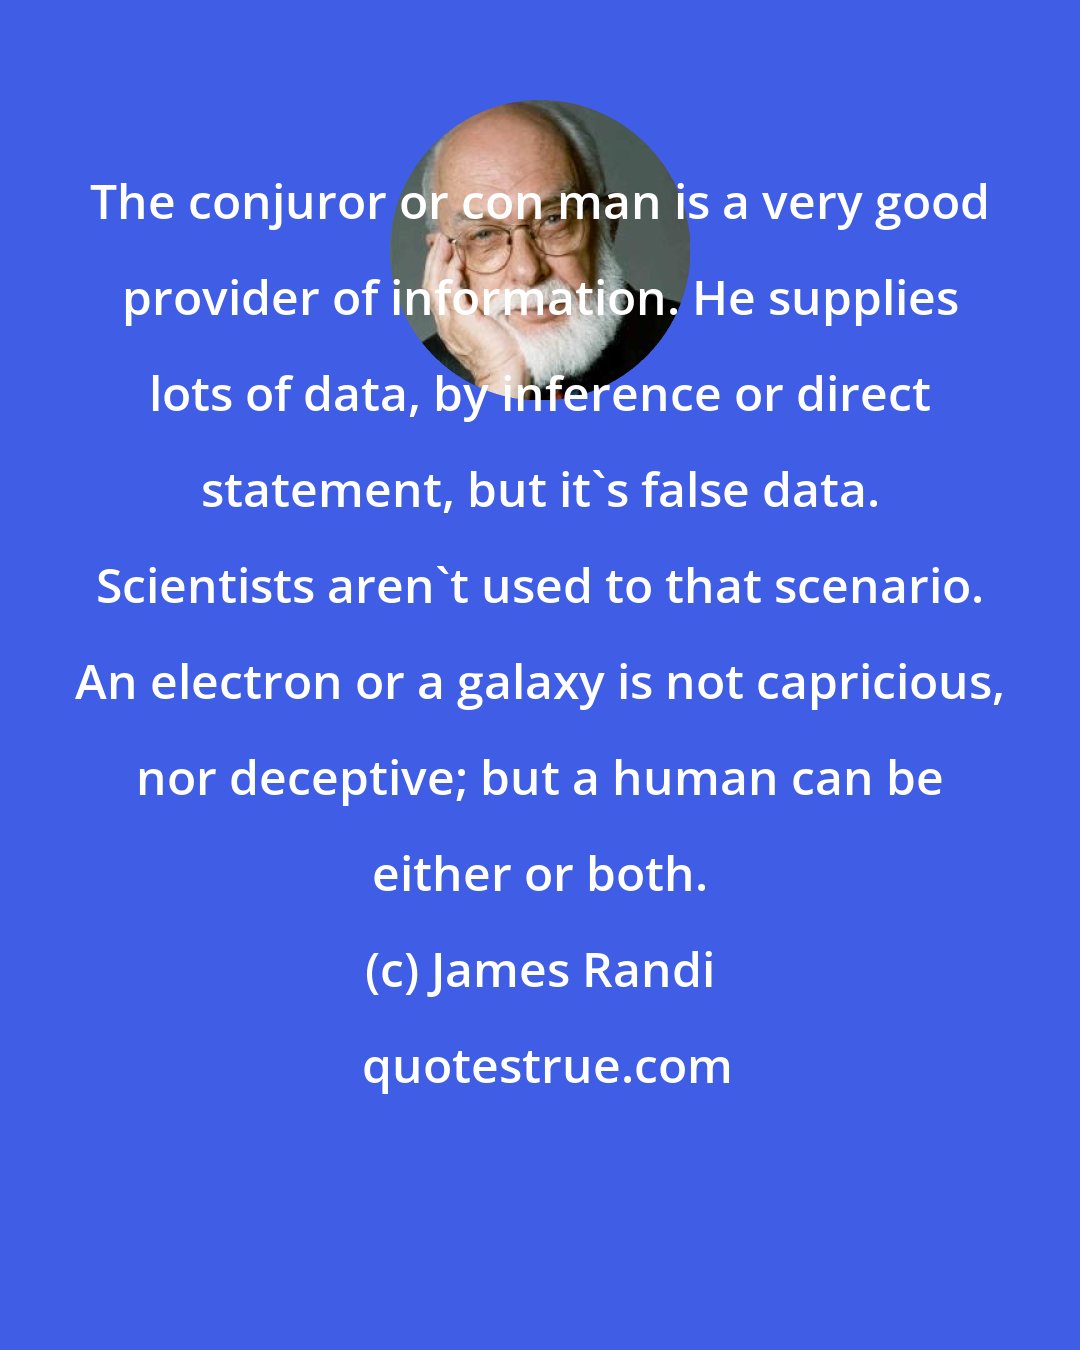 James Randi: The conjuror or con man is a very good provider of information. He supplies lots of data, by inference or direct statement, but it's false data. Scientists aren't used to that scenario. An electron or a galaxy is not capricious, nor deceptive; but a human can be either or both.